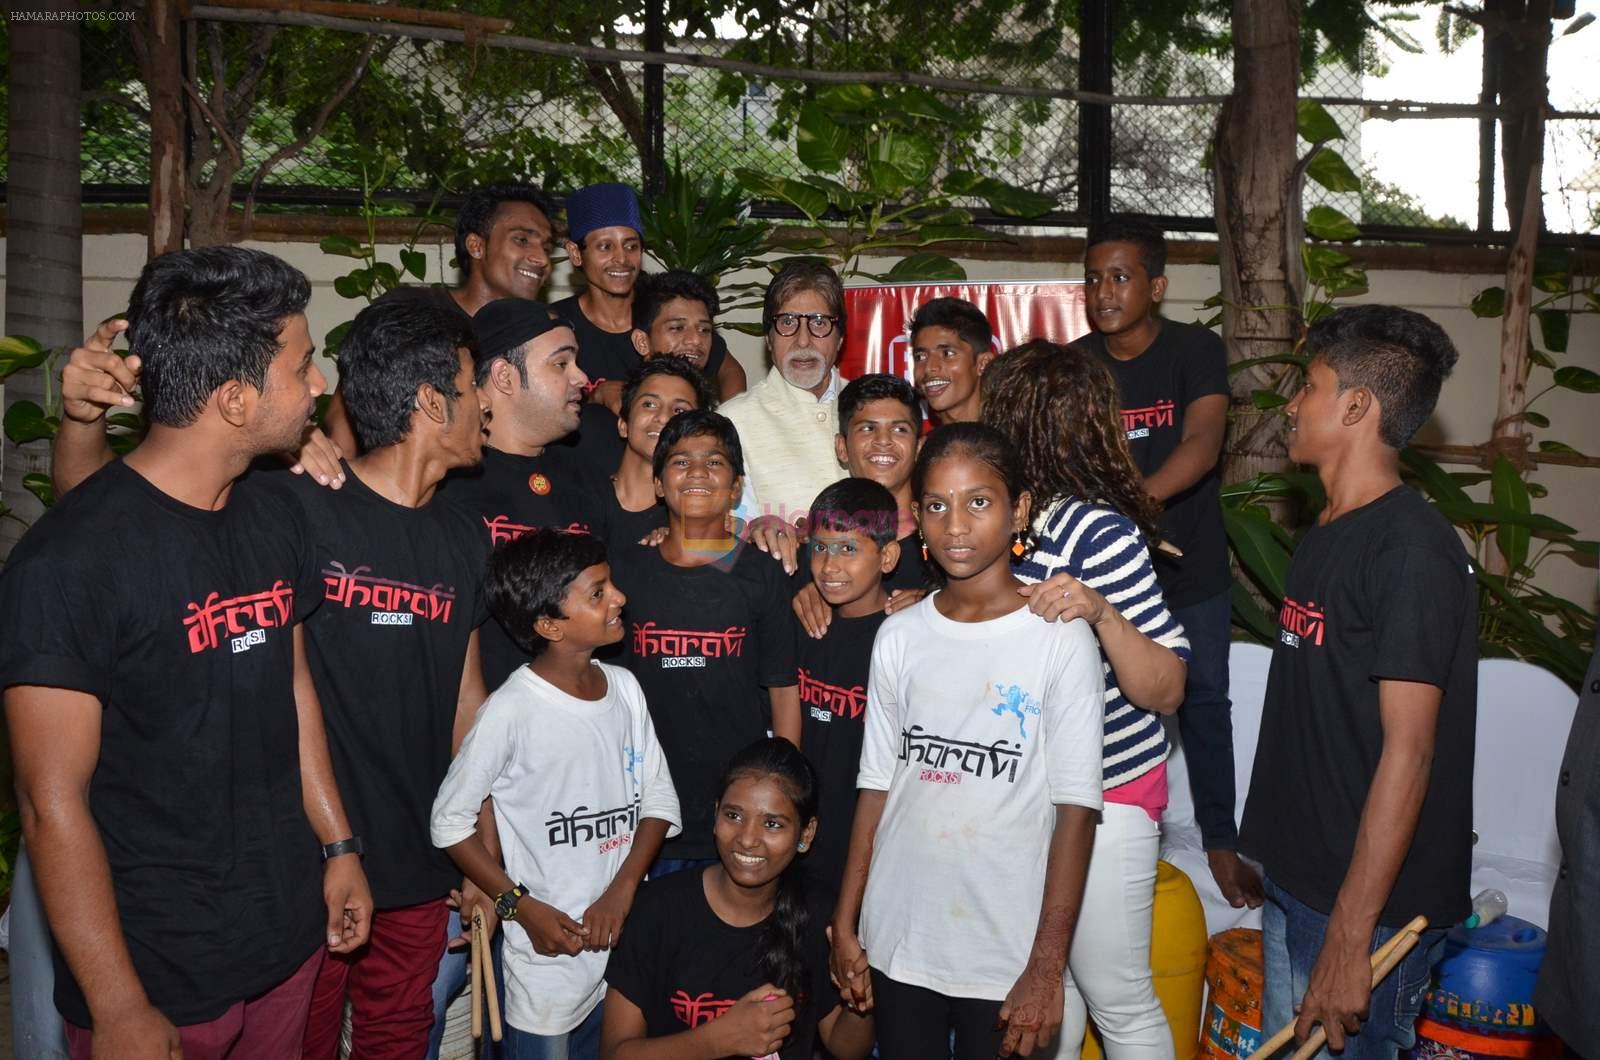 Amitabh bachchan at Dahravi band live performance organised by Red FM in Janak on 31st Aug 2015